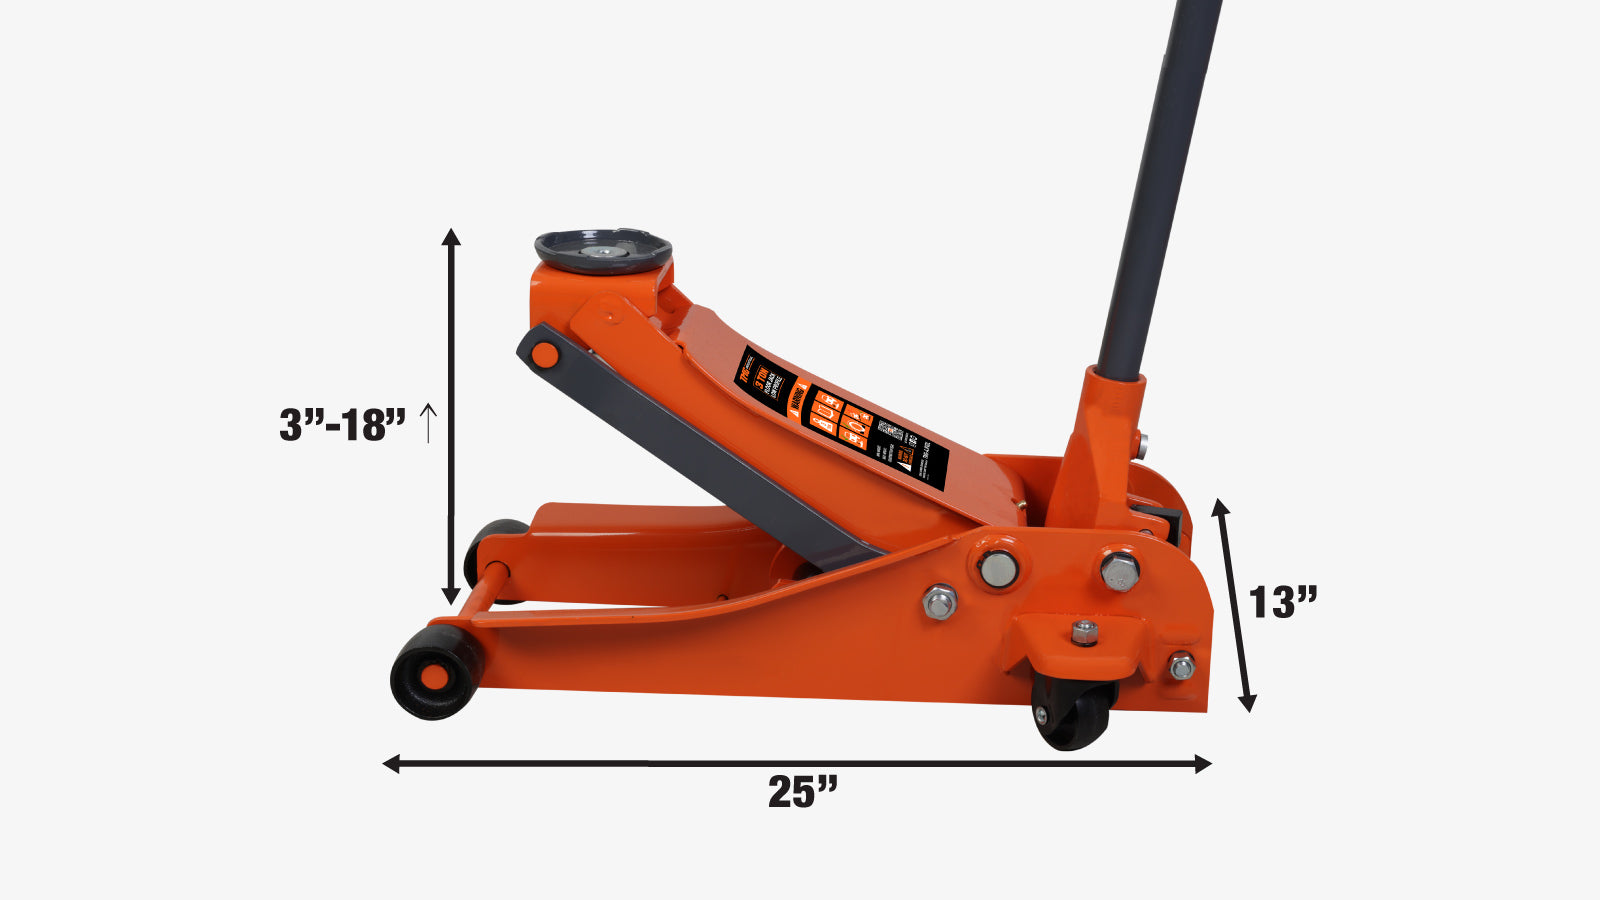 TMG Industrial 3 Ton Low Profile Floor Jack, 18” Max. Height, 3-1/2” Ground Clearance, 360° Caster Pivot, TMG-AJF03L-specifications-image